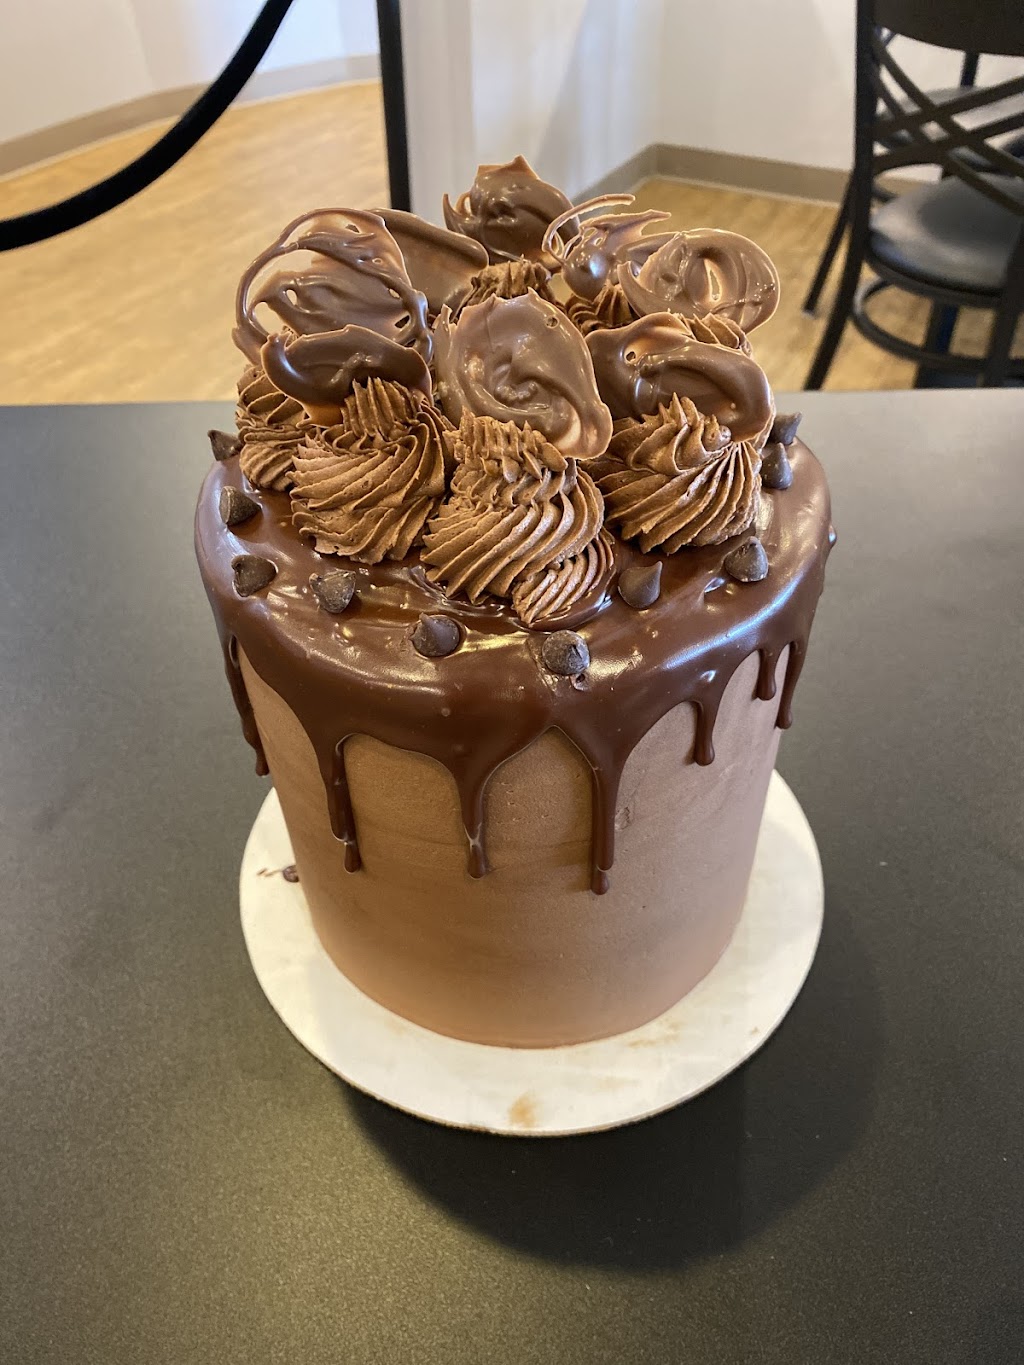 The Confection Connection Cafe and Bakery | 1917 Melody Ln, Greenfield, IN 46140 | Phone: (317) 318-2031